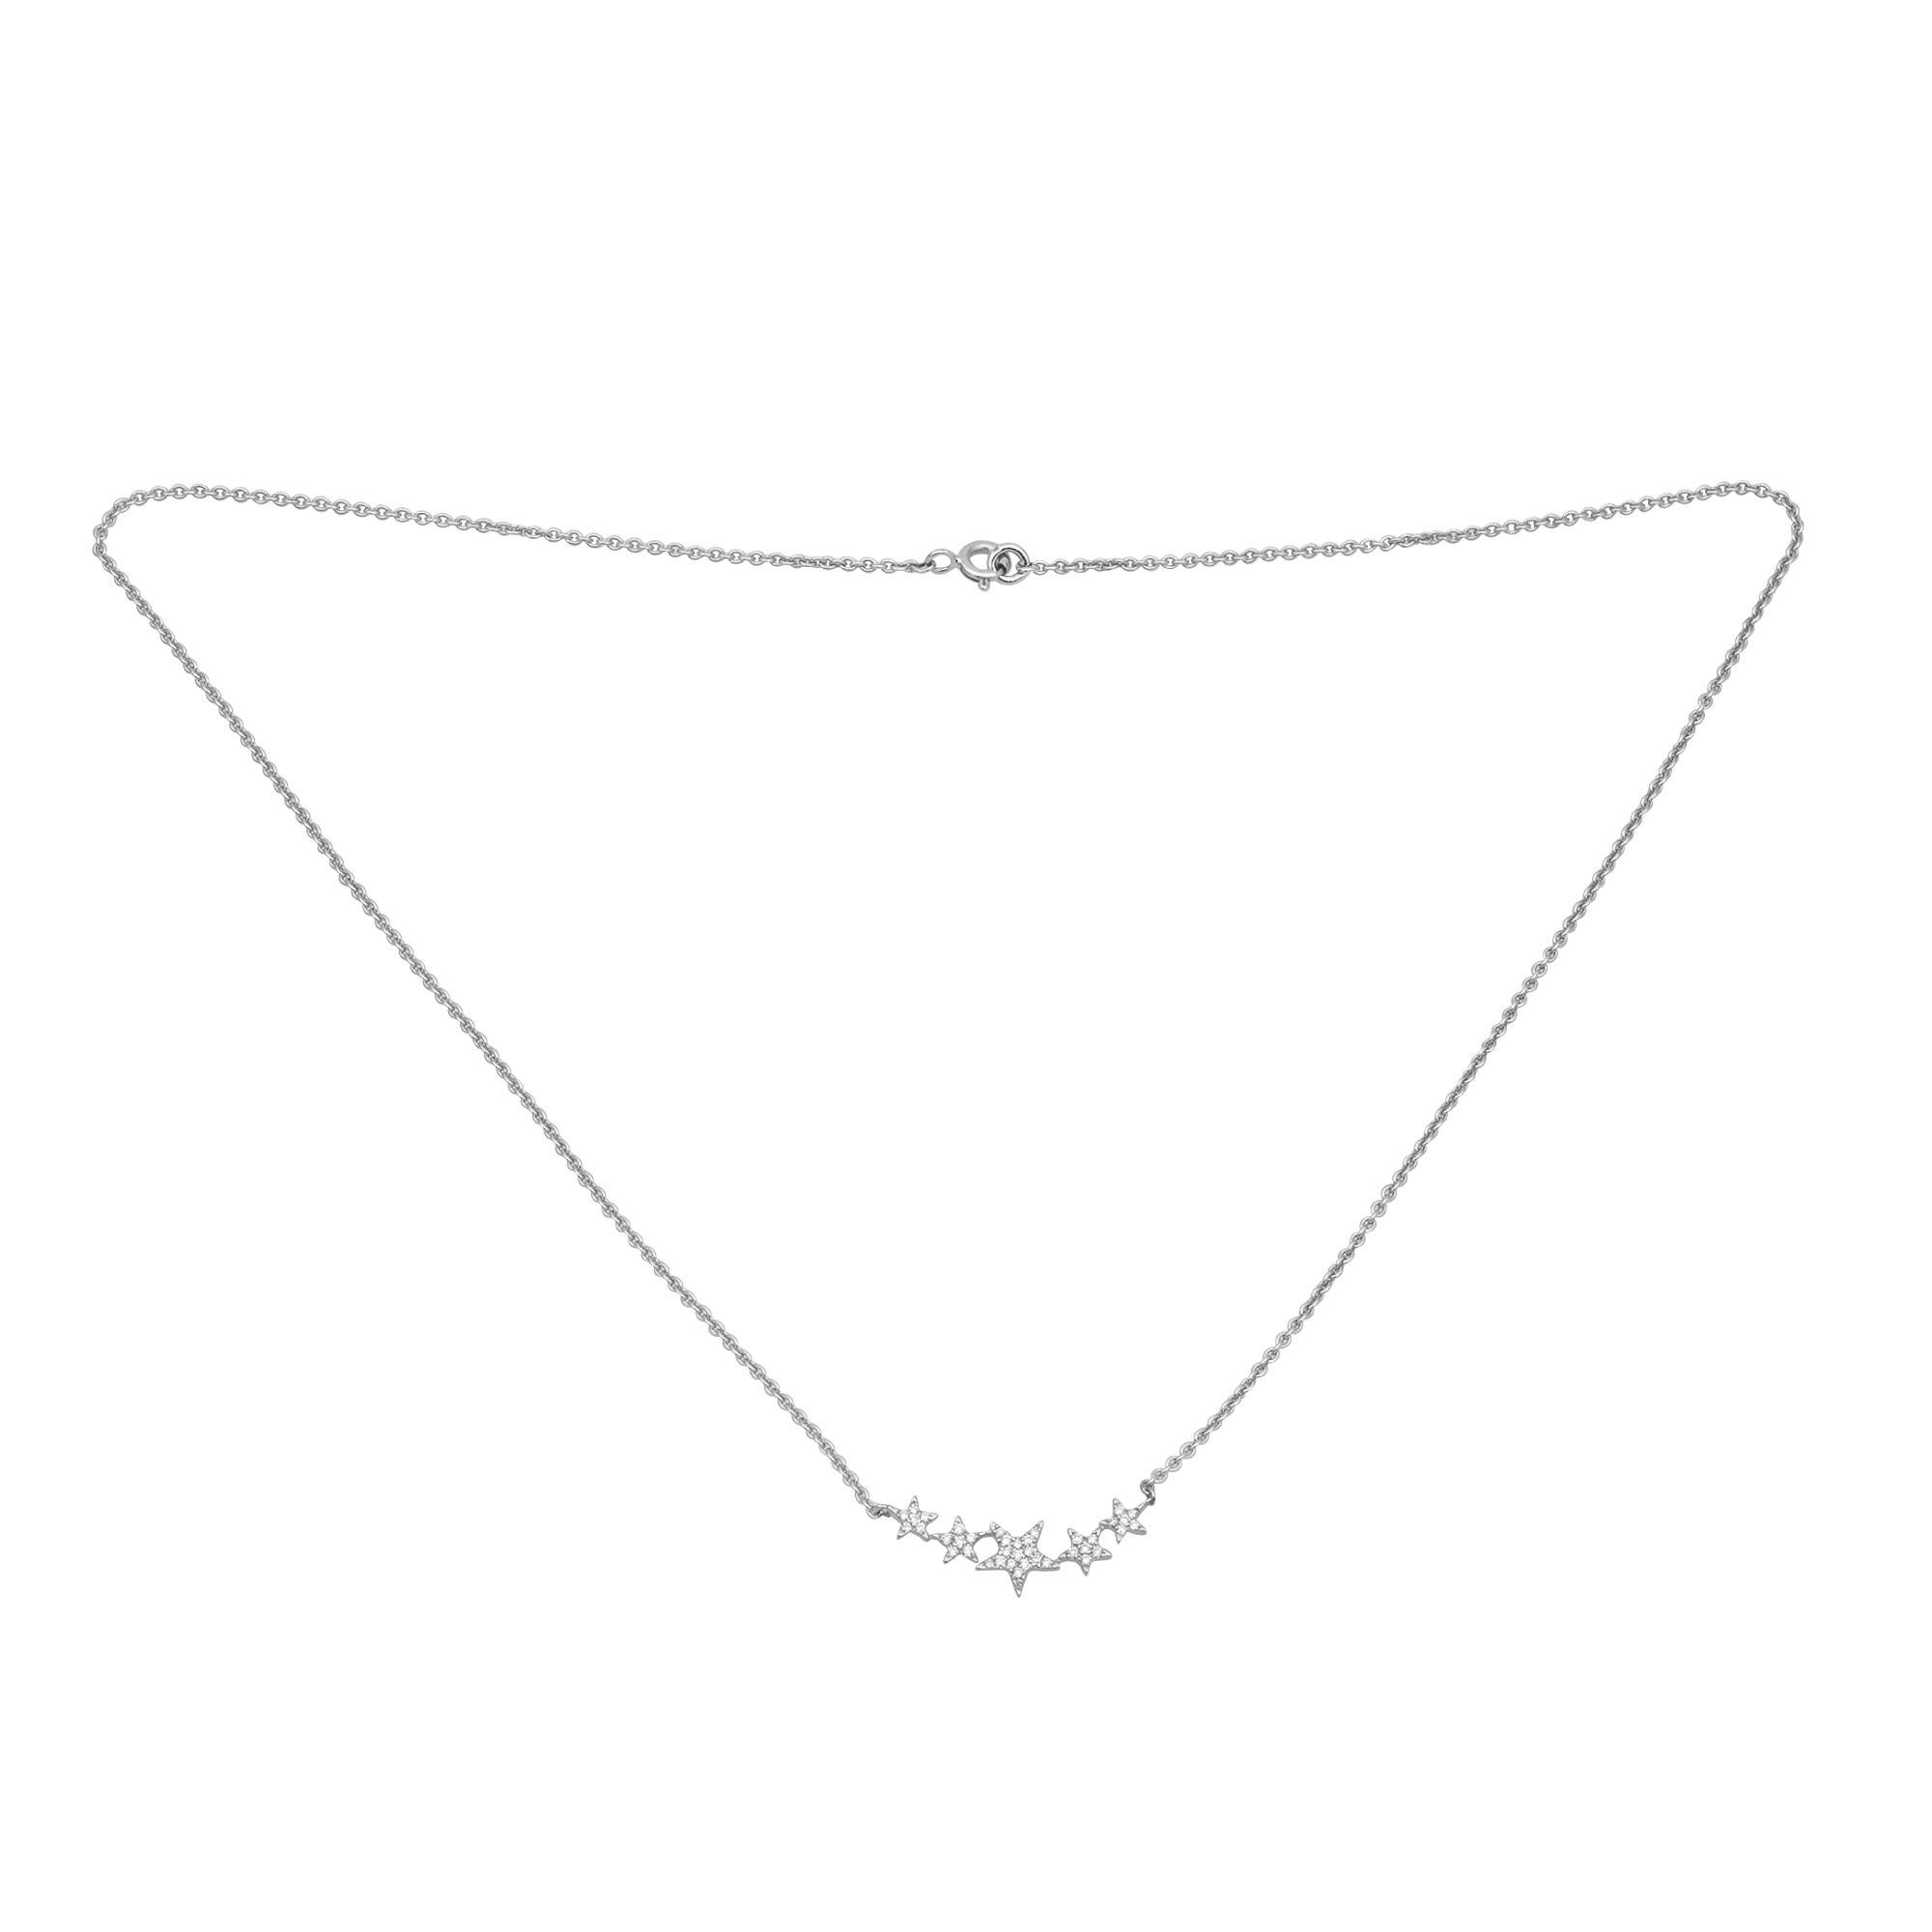 Our gorgeous diamond necklace are finely set into the most astonishing designs ranging from modern-era jewels to fascinating classics, and they will certainly rekindle the romance between you and your spouse. Our Diamond necklace are a regal